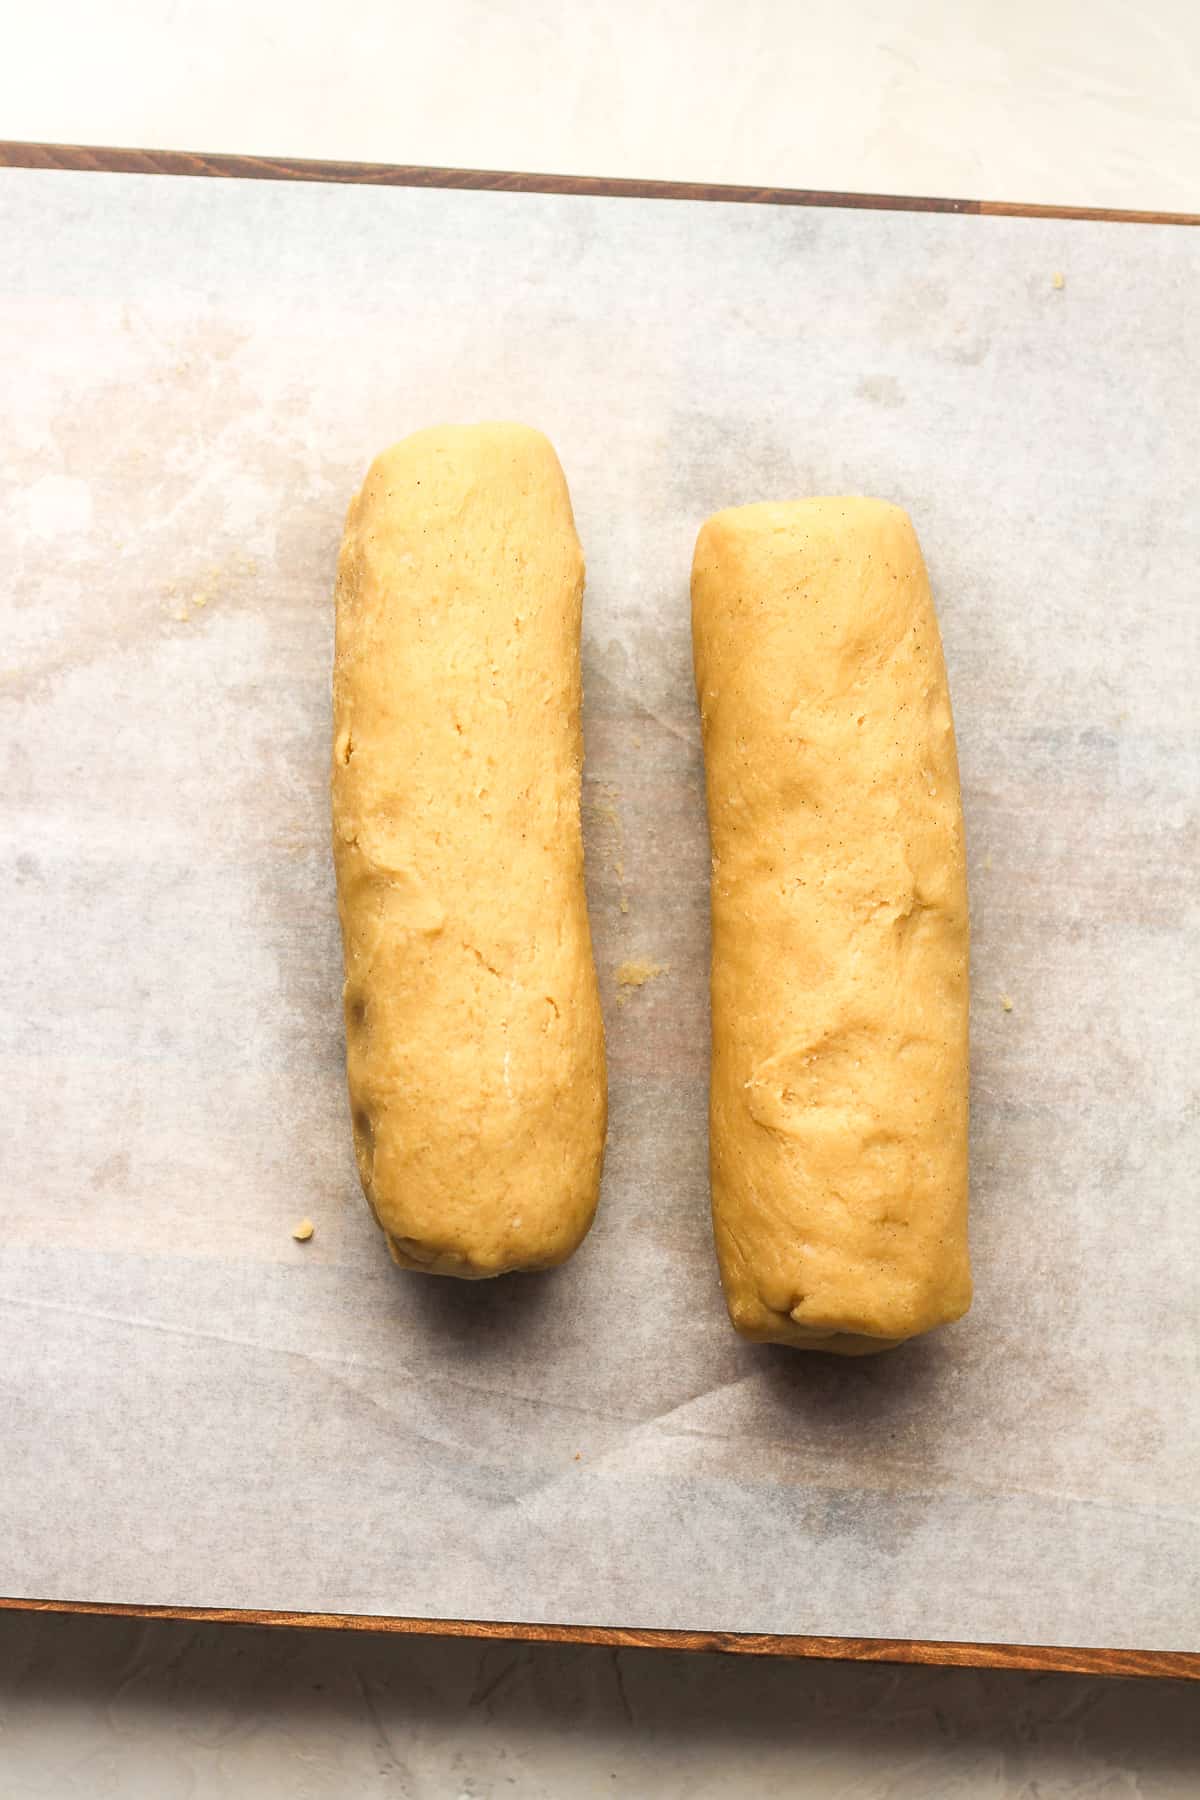 Two rolls of shortbread cookie dough.